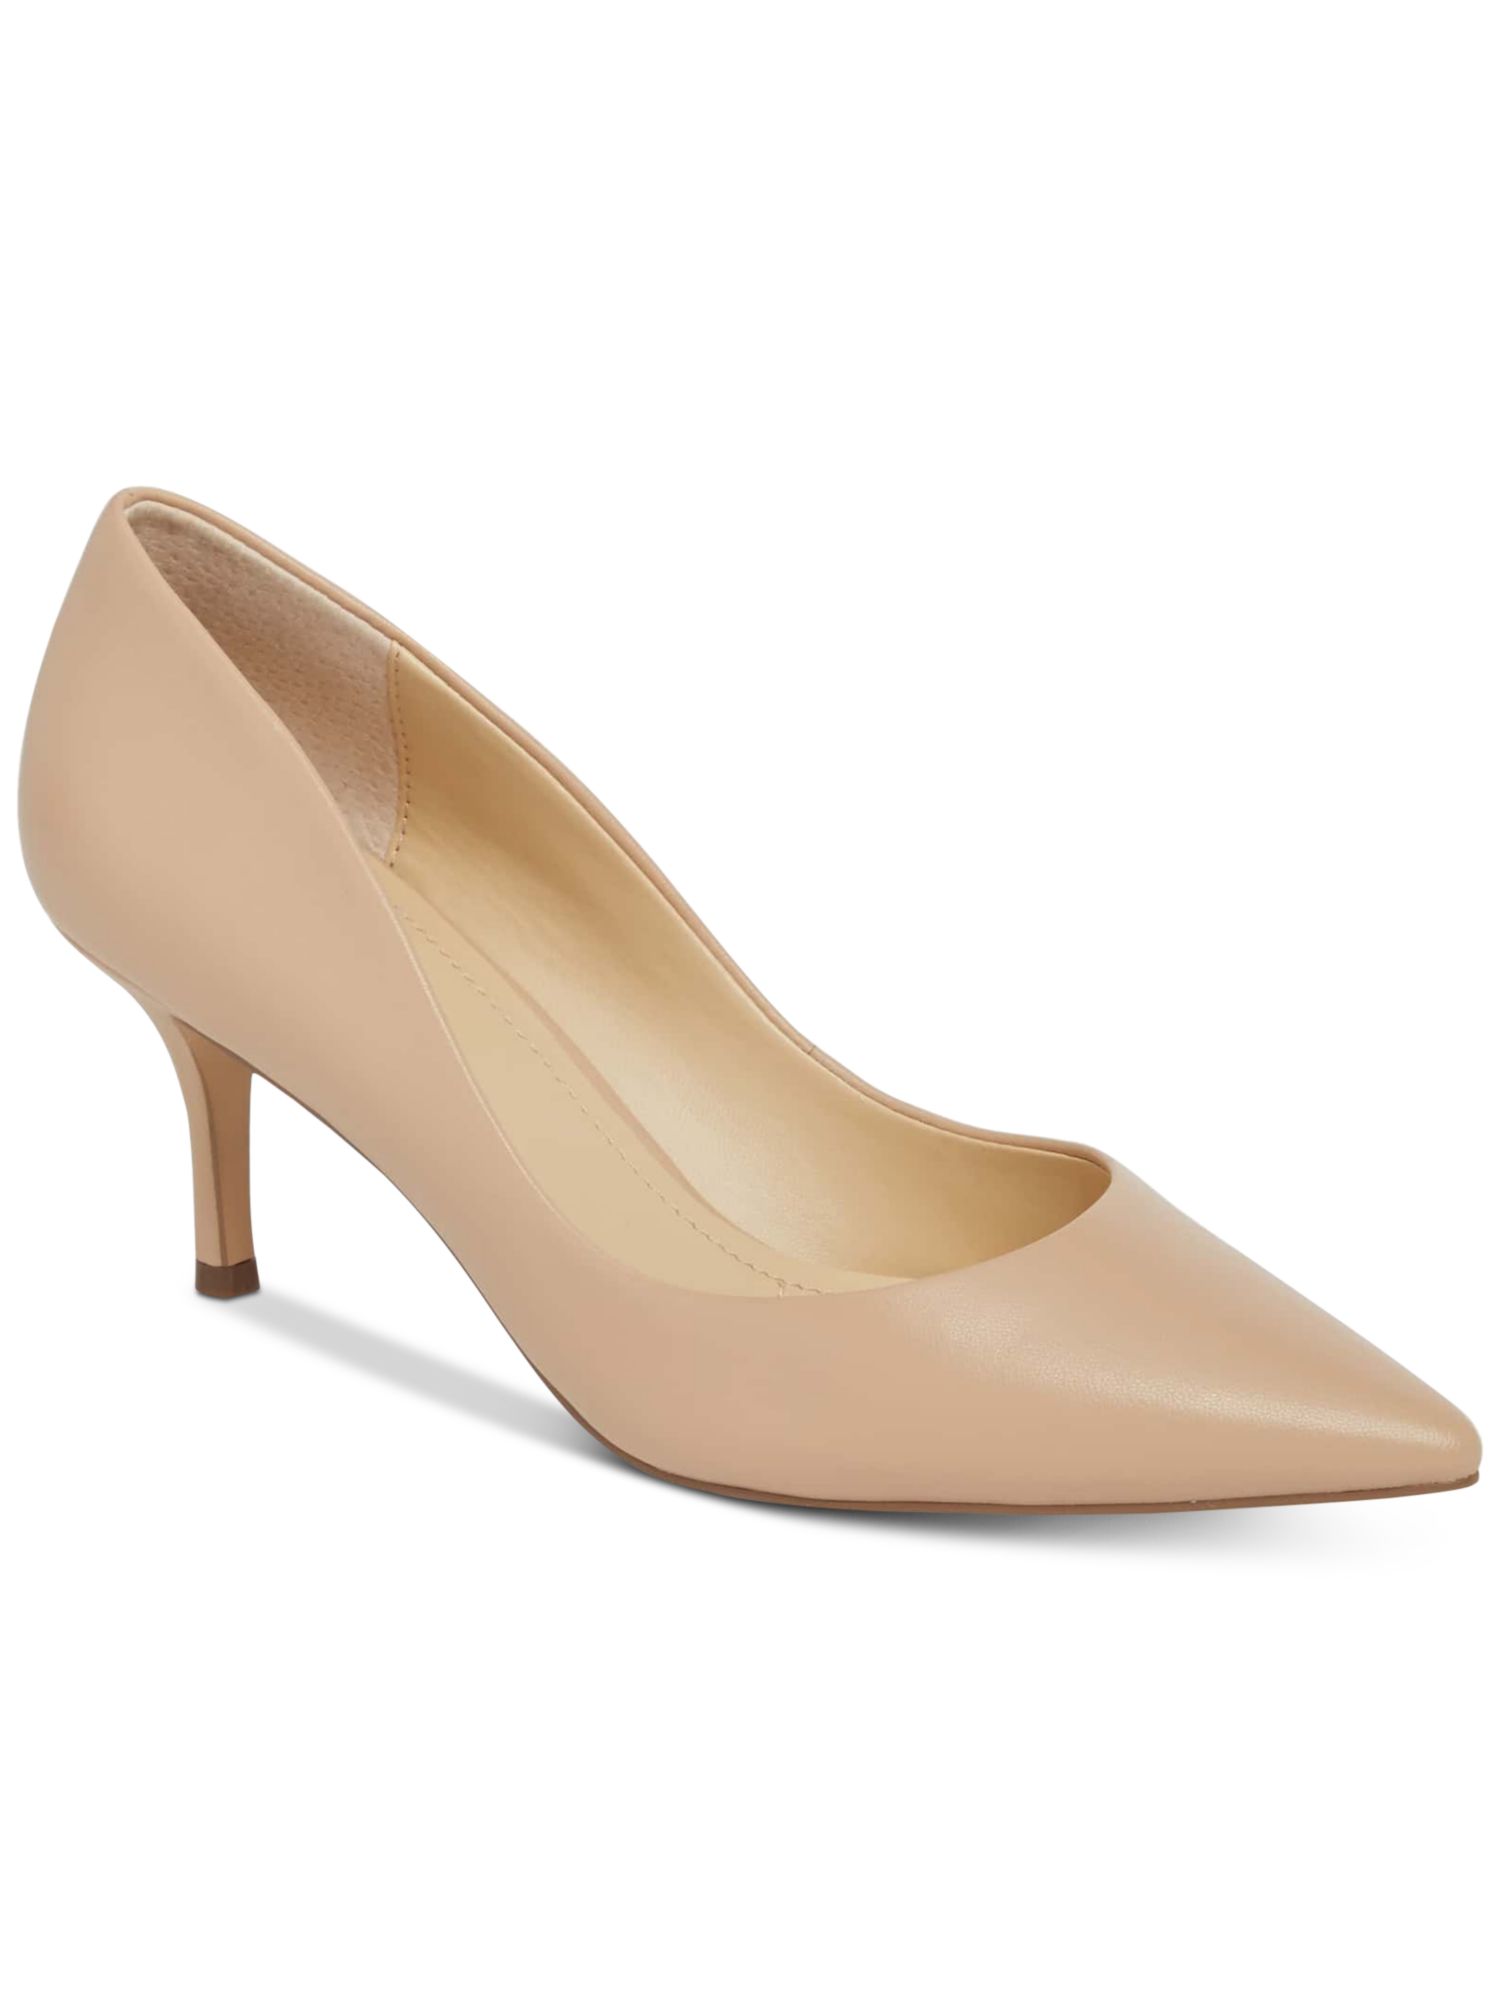 CHARLES BY CHARLES DAVID Womens Beige Padded Angelica Pointed Toe Stiletto Slip On Dress Pumps 10 M